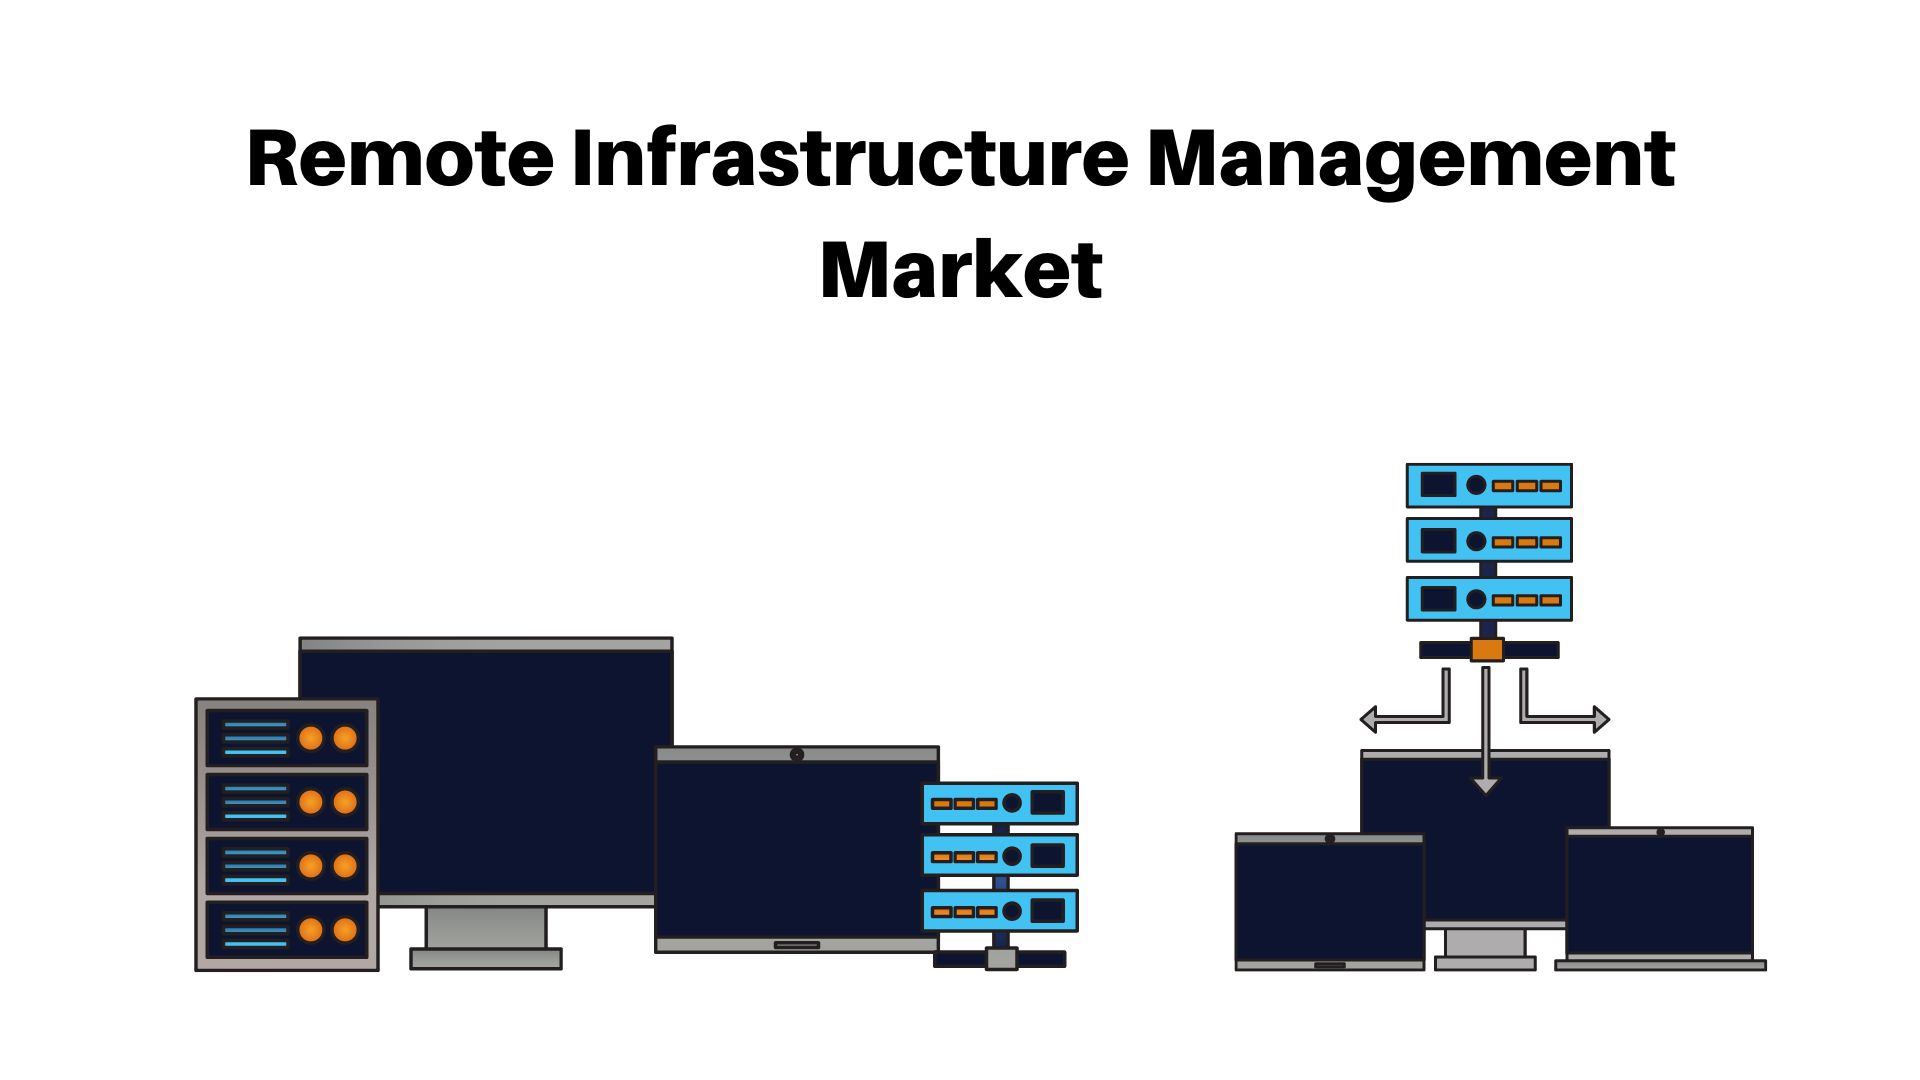 CAGR of 11.8% For Remote Infrastructure Management Market to Gain USD 98.1 Billion by 2033